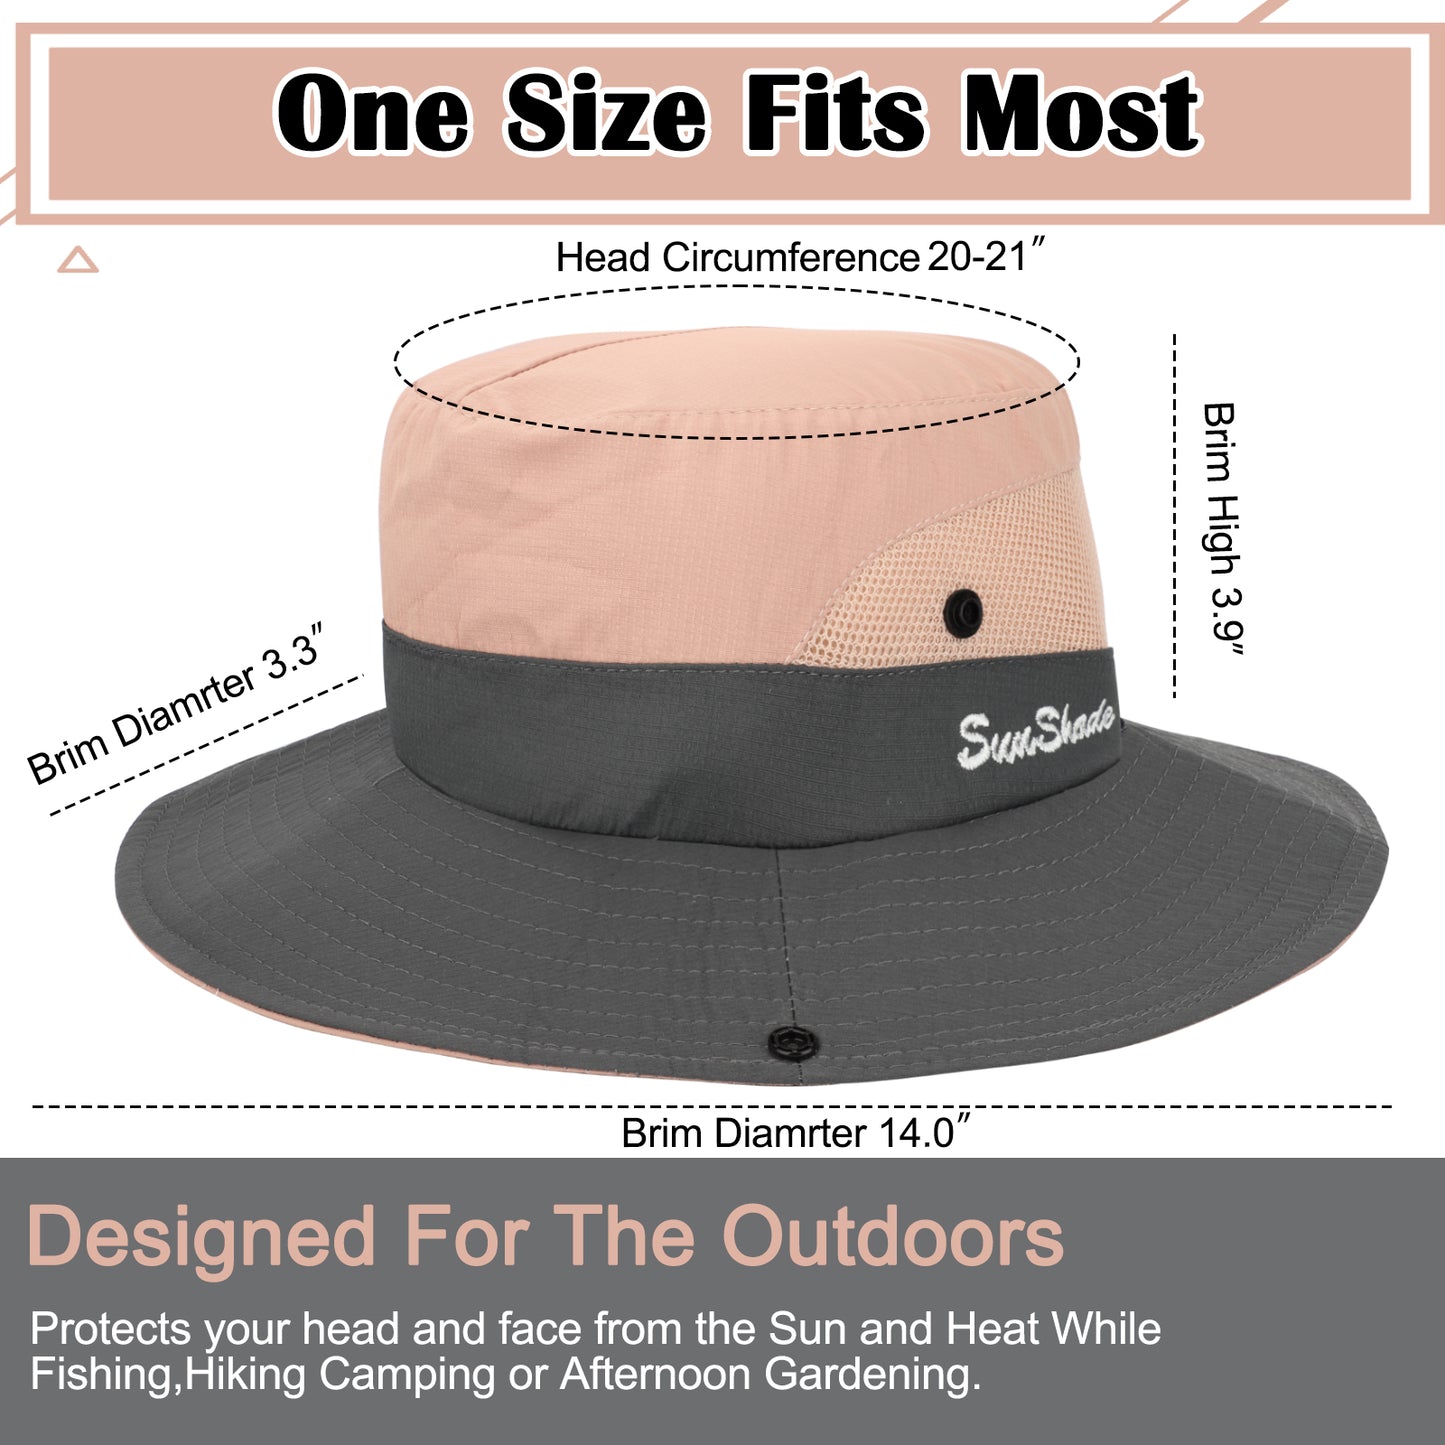 Sun Visor Hats - Ultimate Sun Protection with Wide Brim and Convertible Design